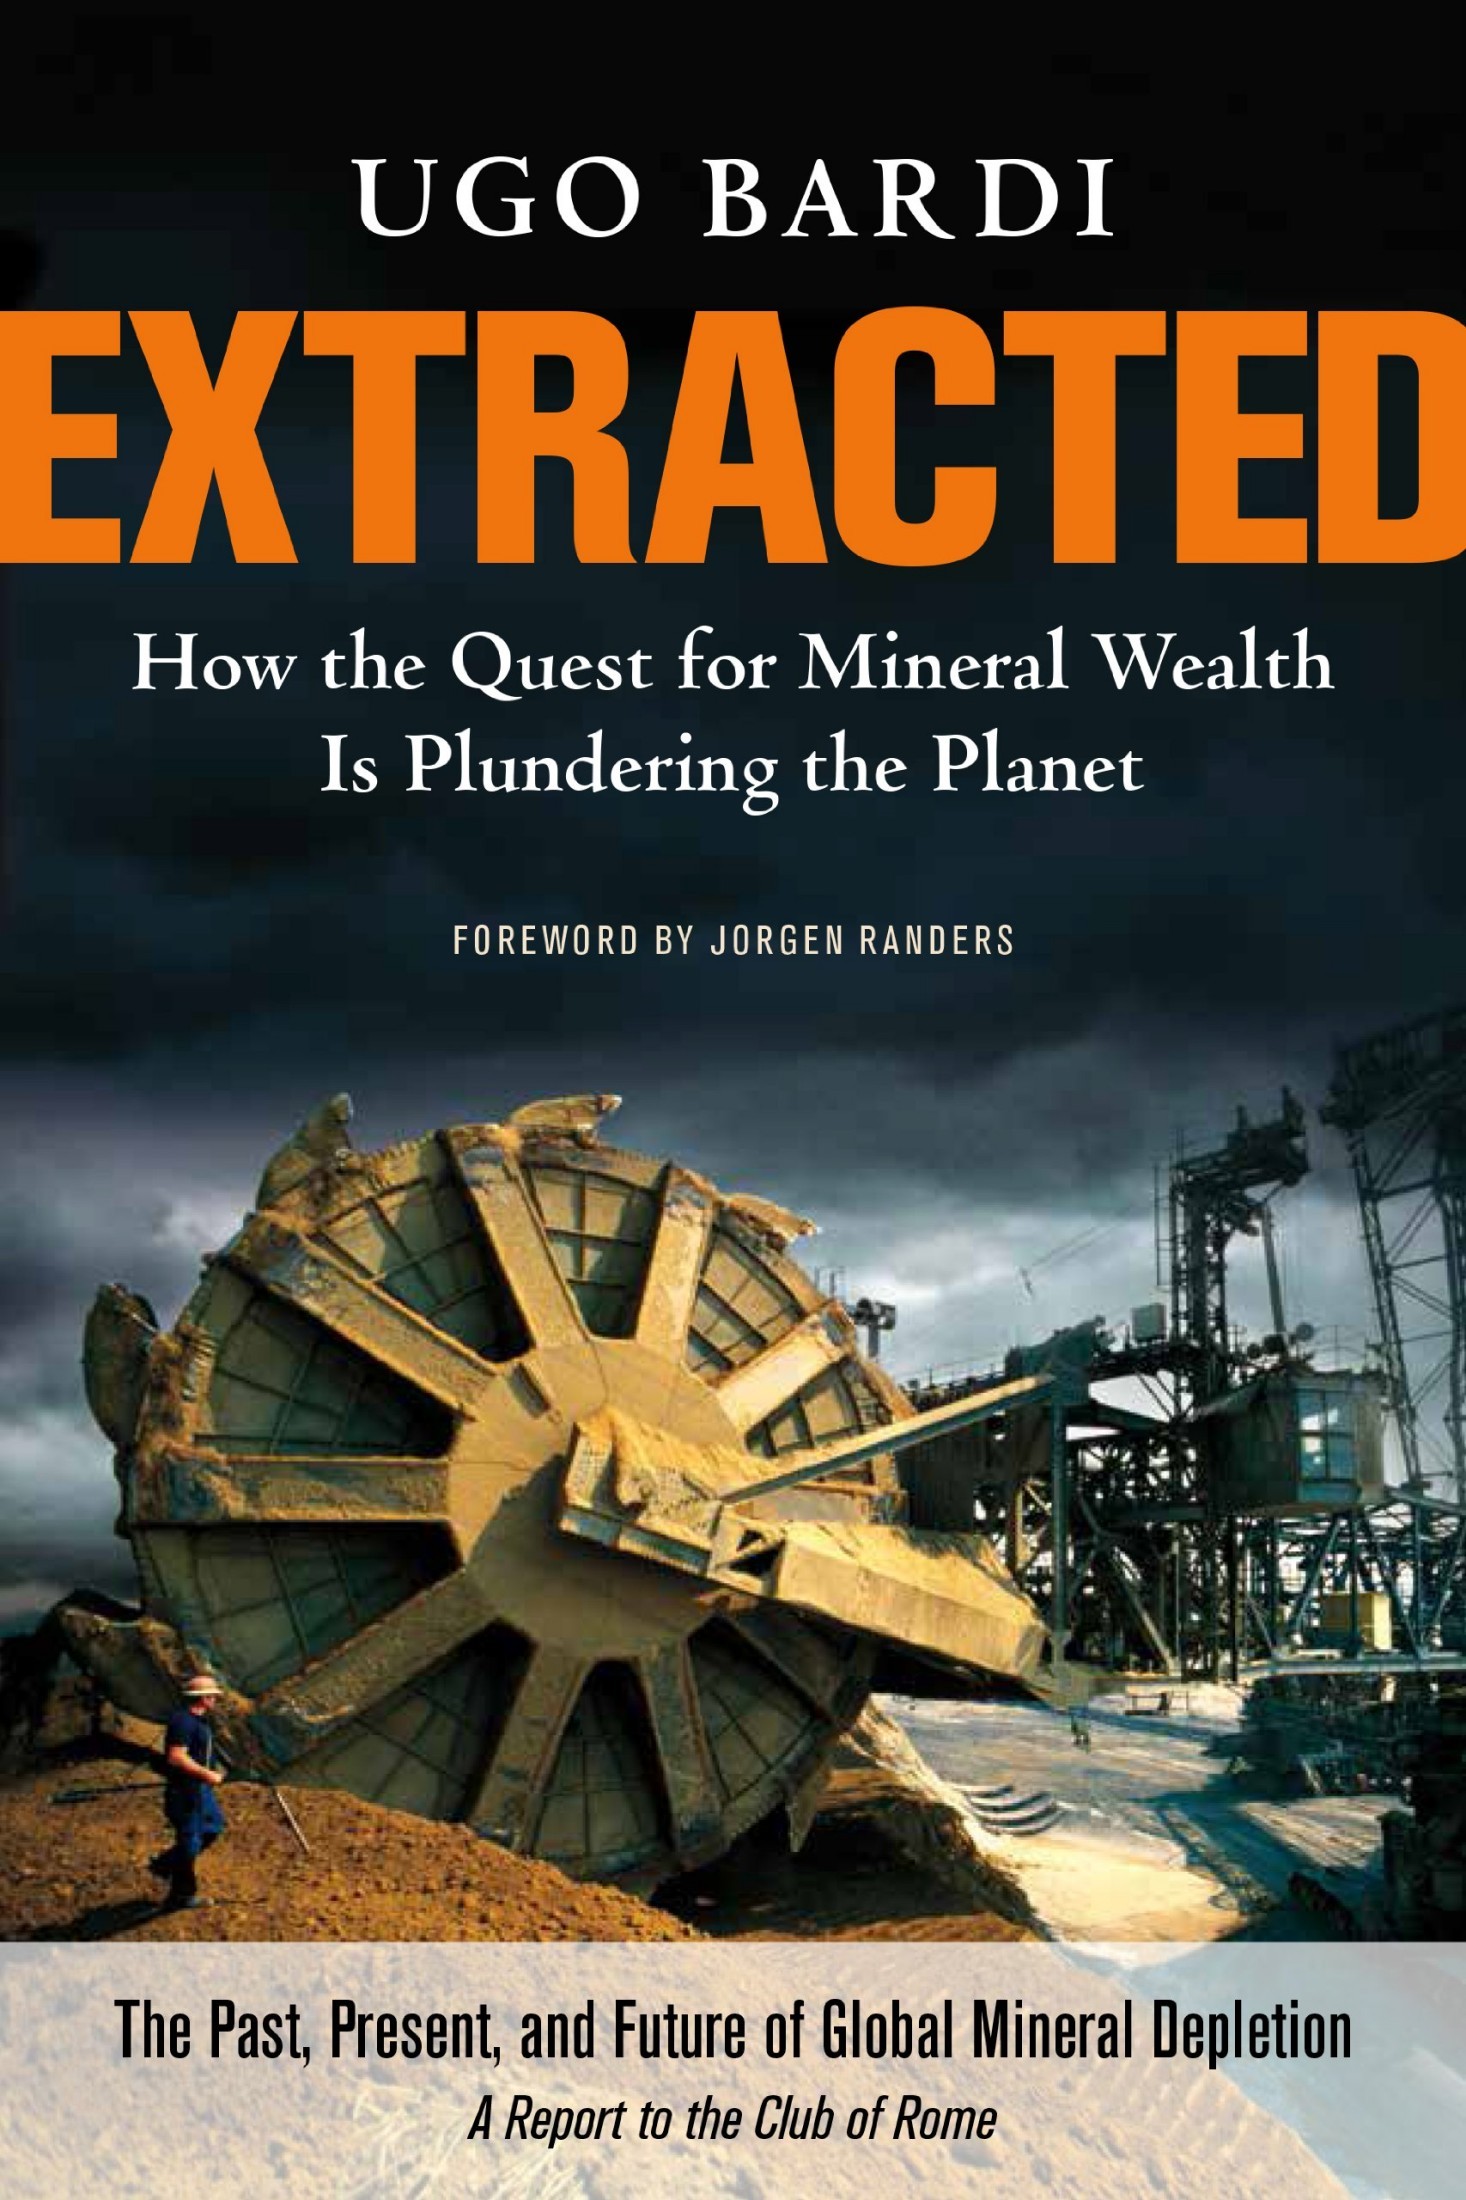 Extracted: How the Quest for Mineral Wealth Is Plundering the Planet